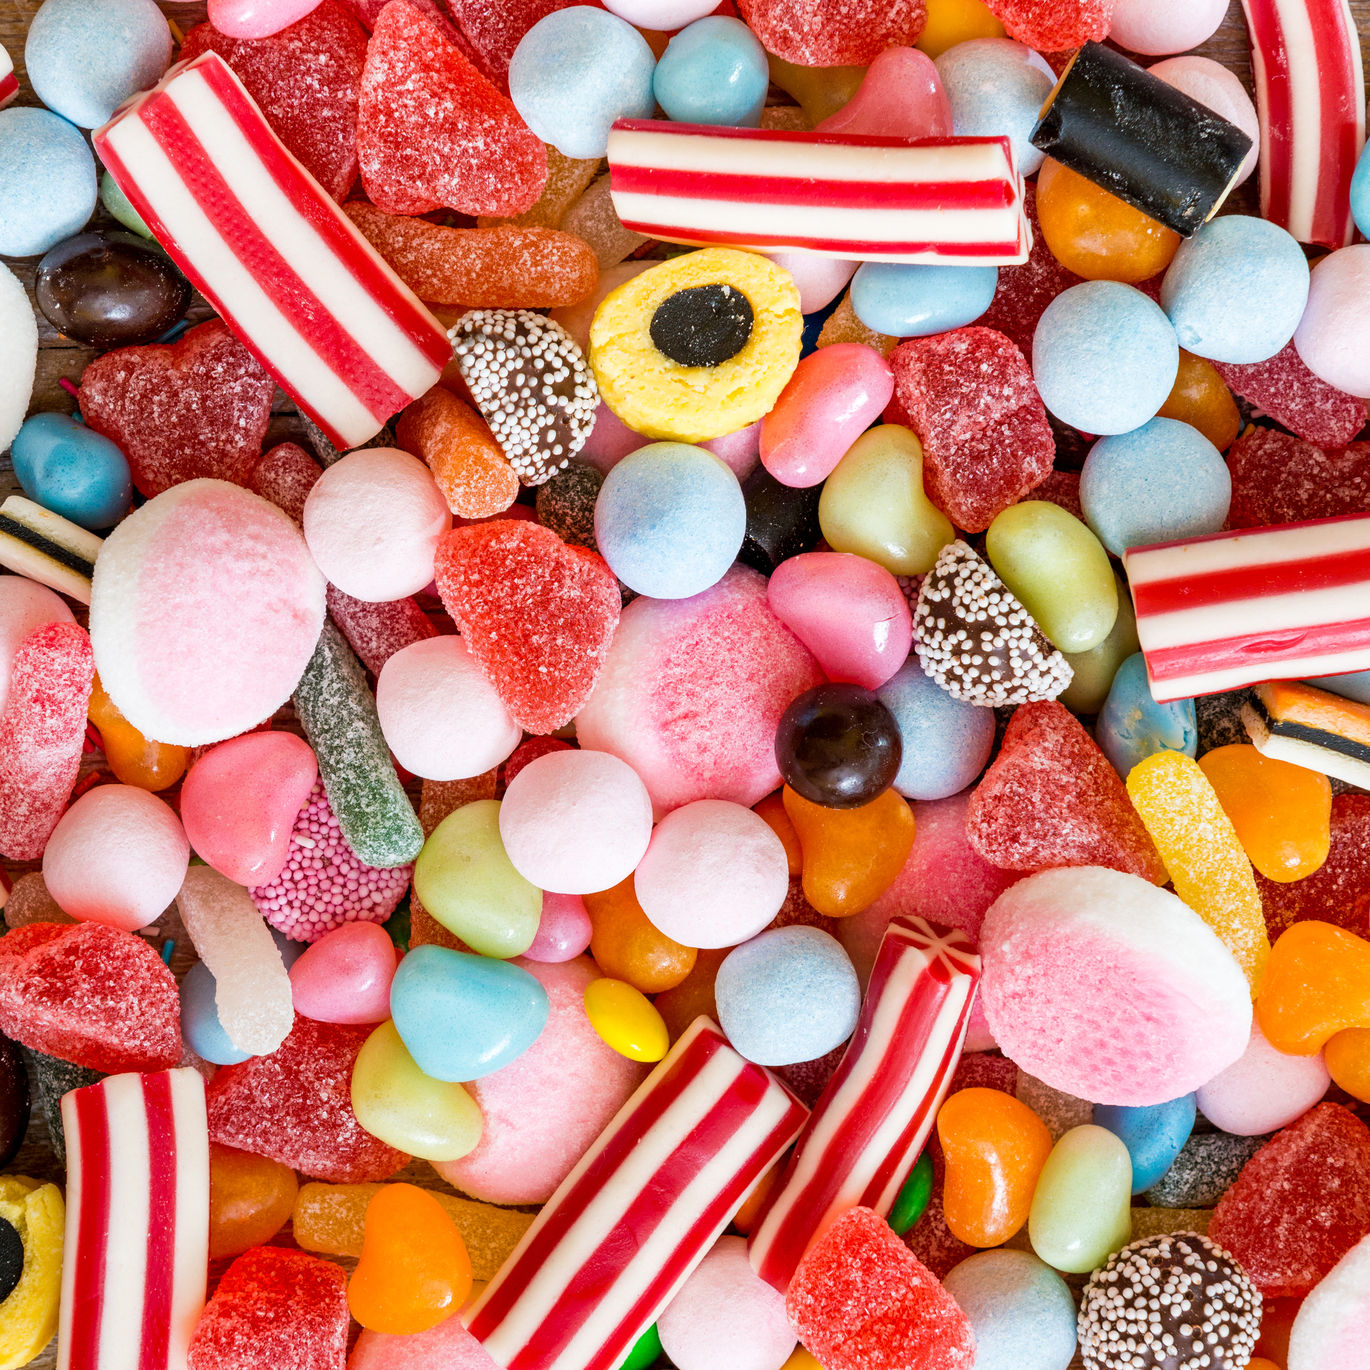 Tainted Candy in NY? Worry More about the Other Kind of Food Poisoning